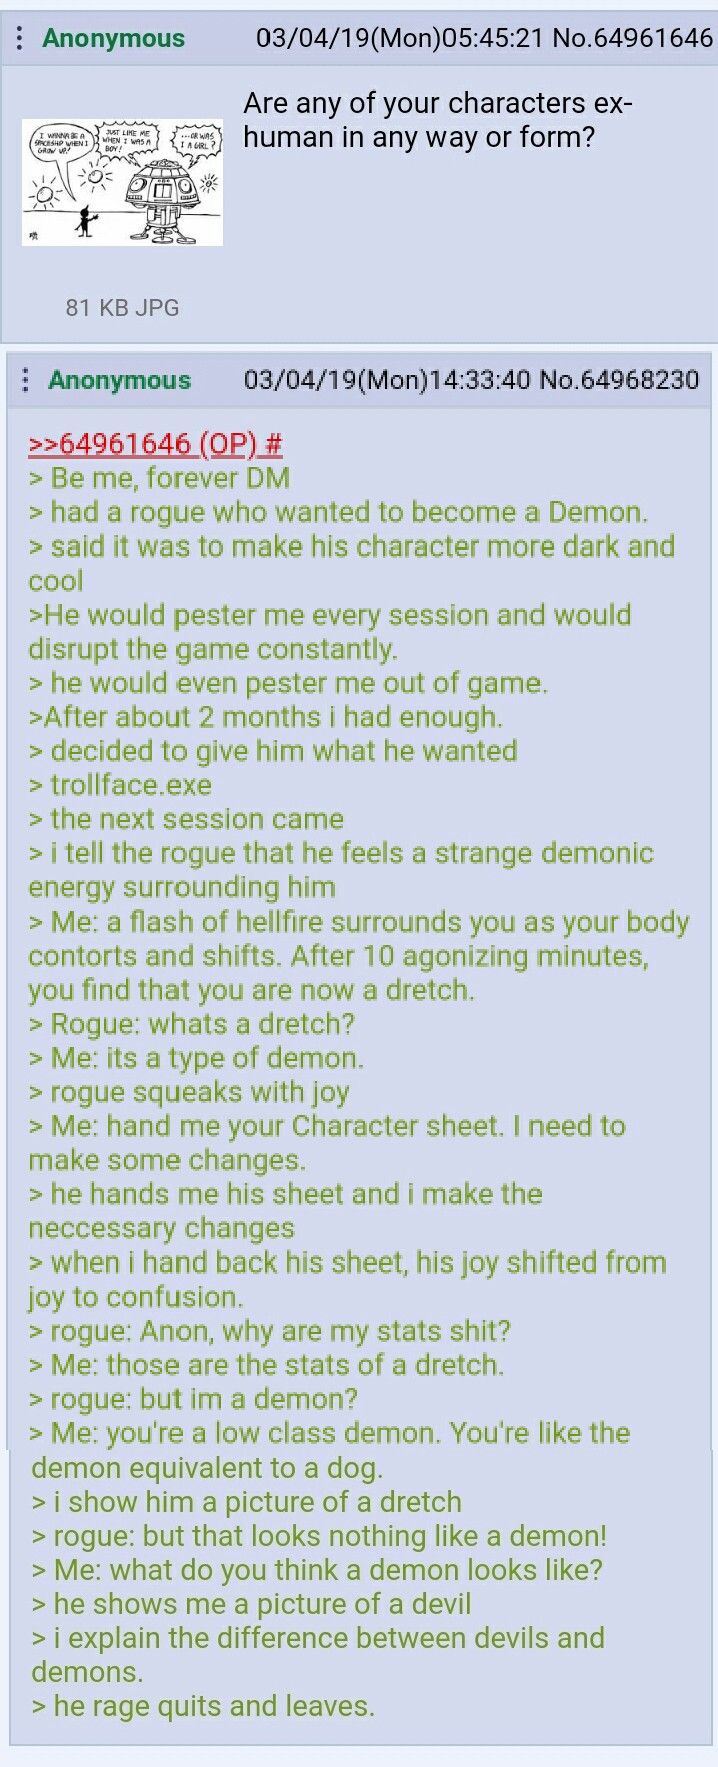 Anon has an edgy player